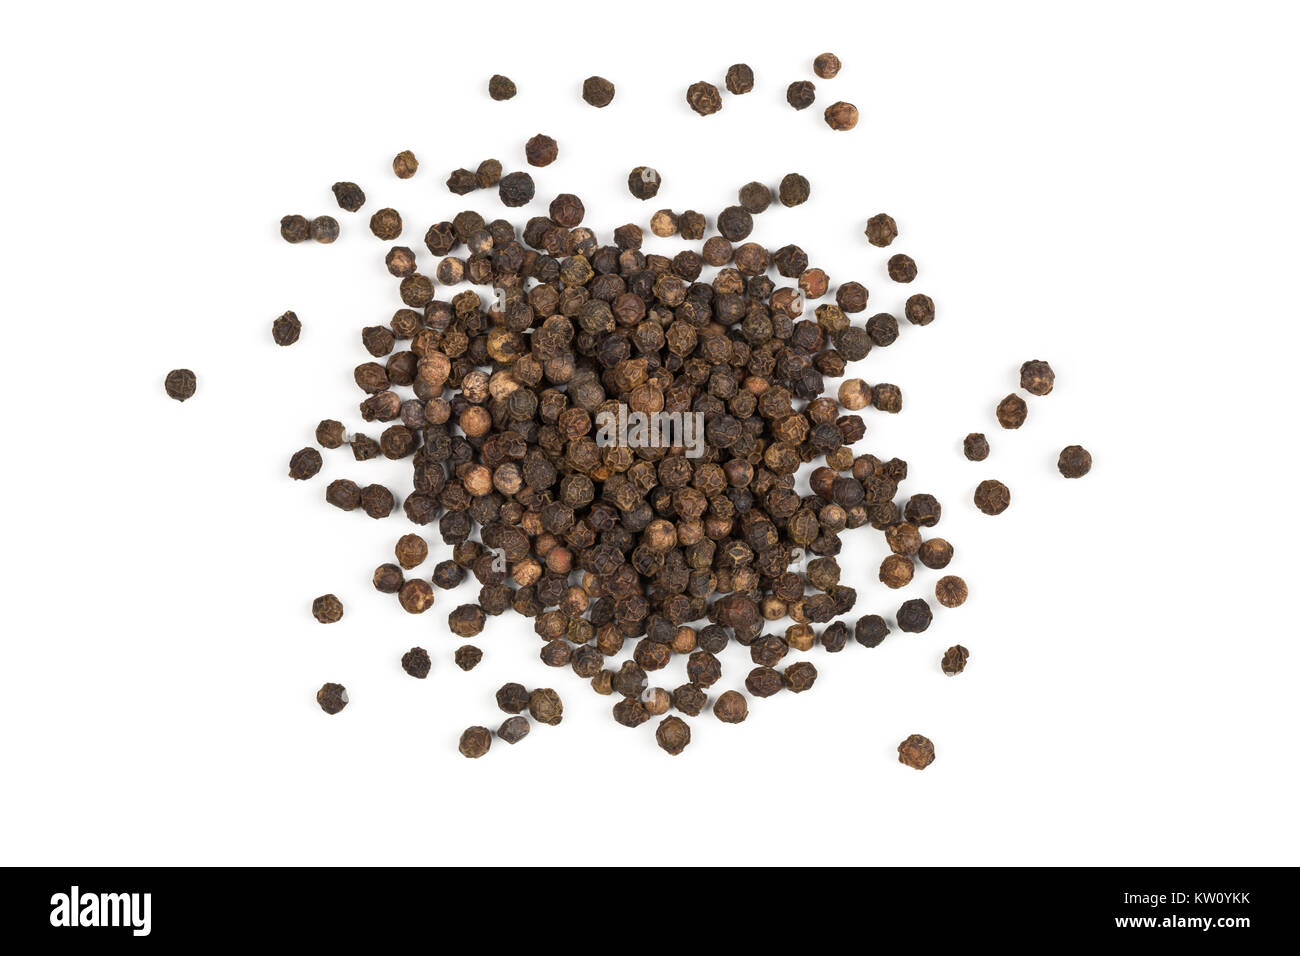 Heap of raw, natural, unprocessed black pepper peppercorns over white background Stock Photo